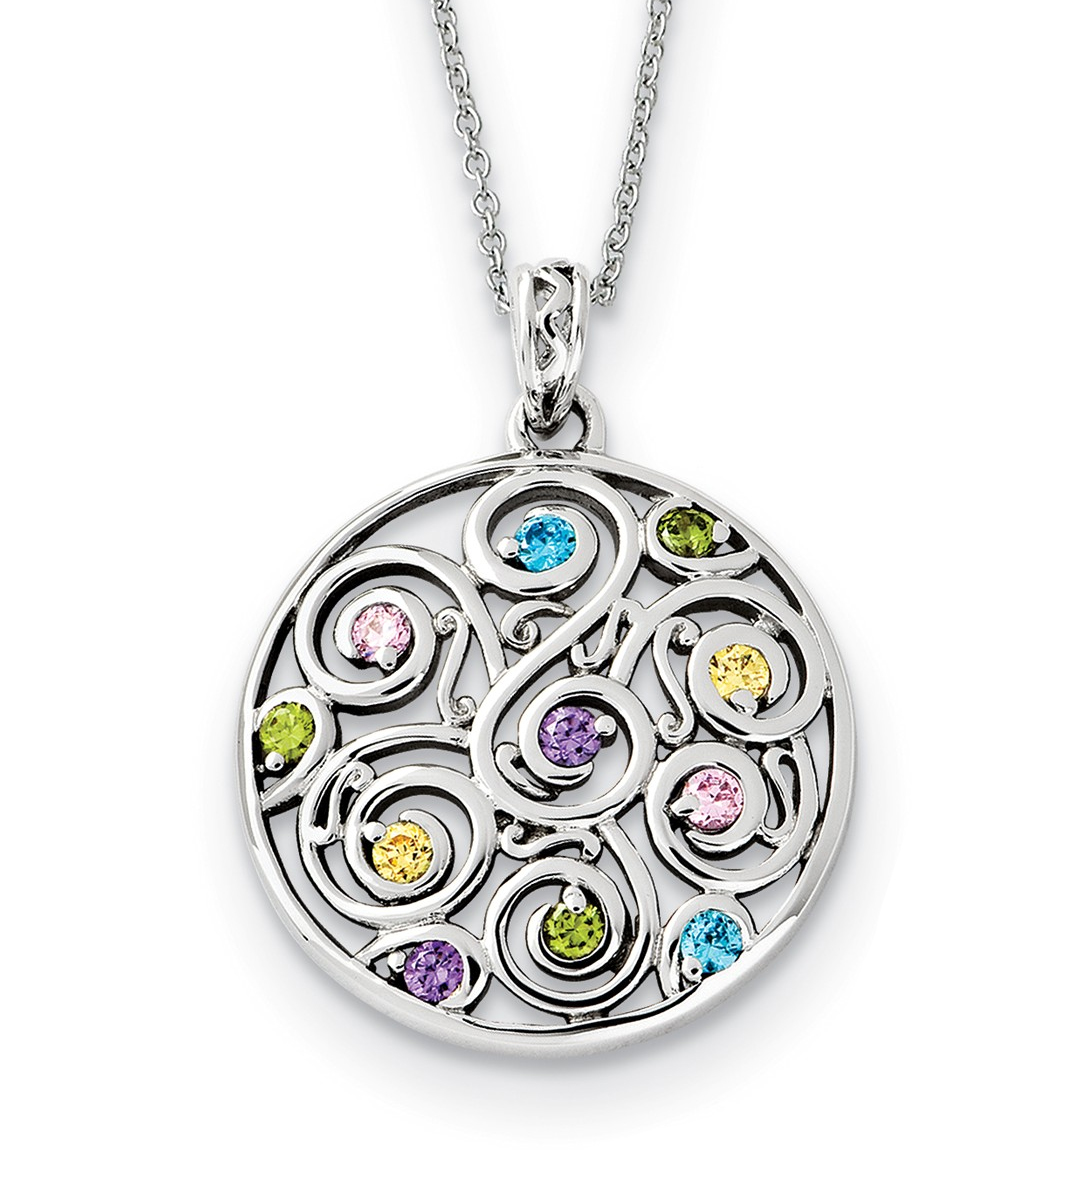   'Kaleidoscope of Wishes' CZ Pendant Necklace, Rhodium-Plated Sterling Silver, 18